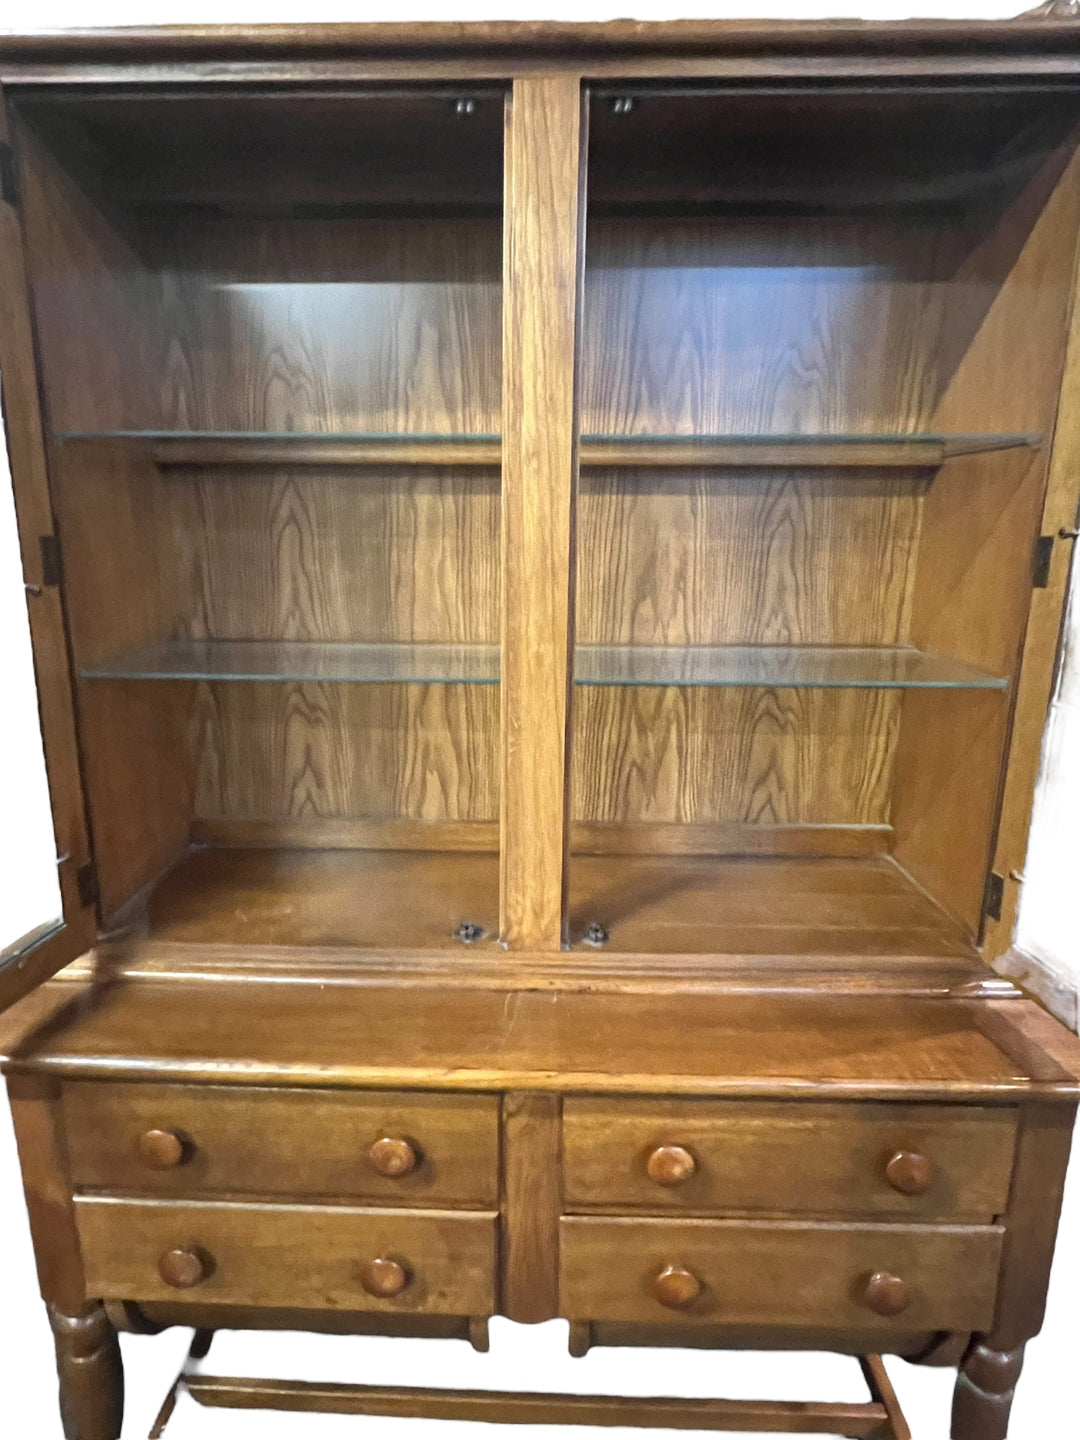 Wooden Hutch/Cabinet Possum Belly Drawers PICKUP ONLY